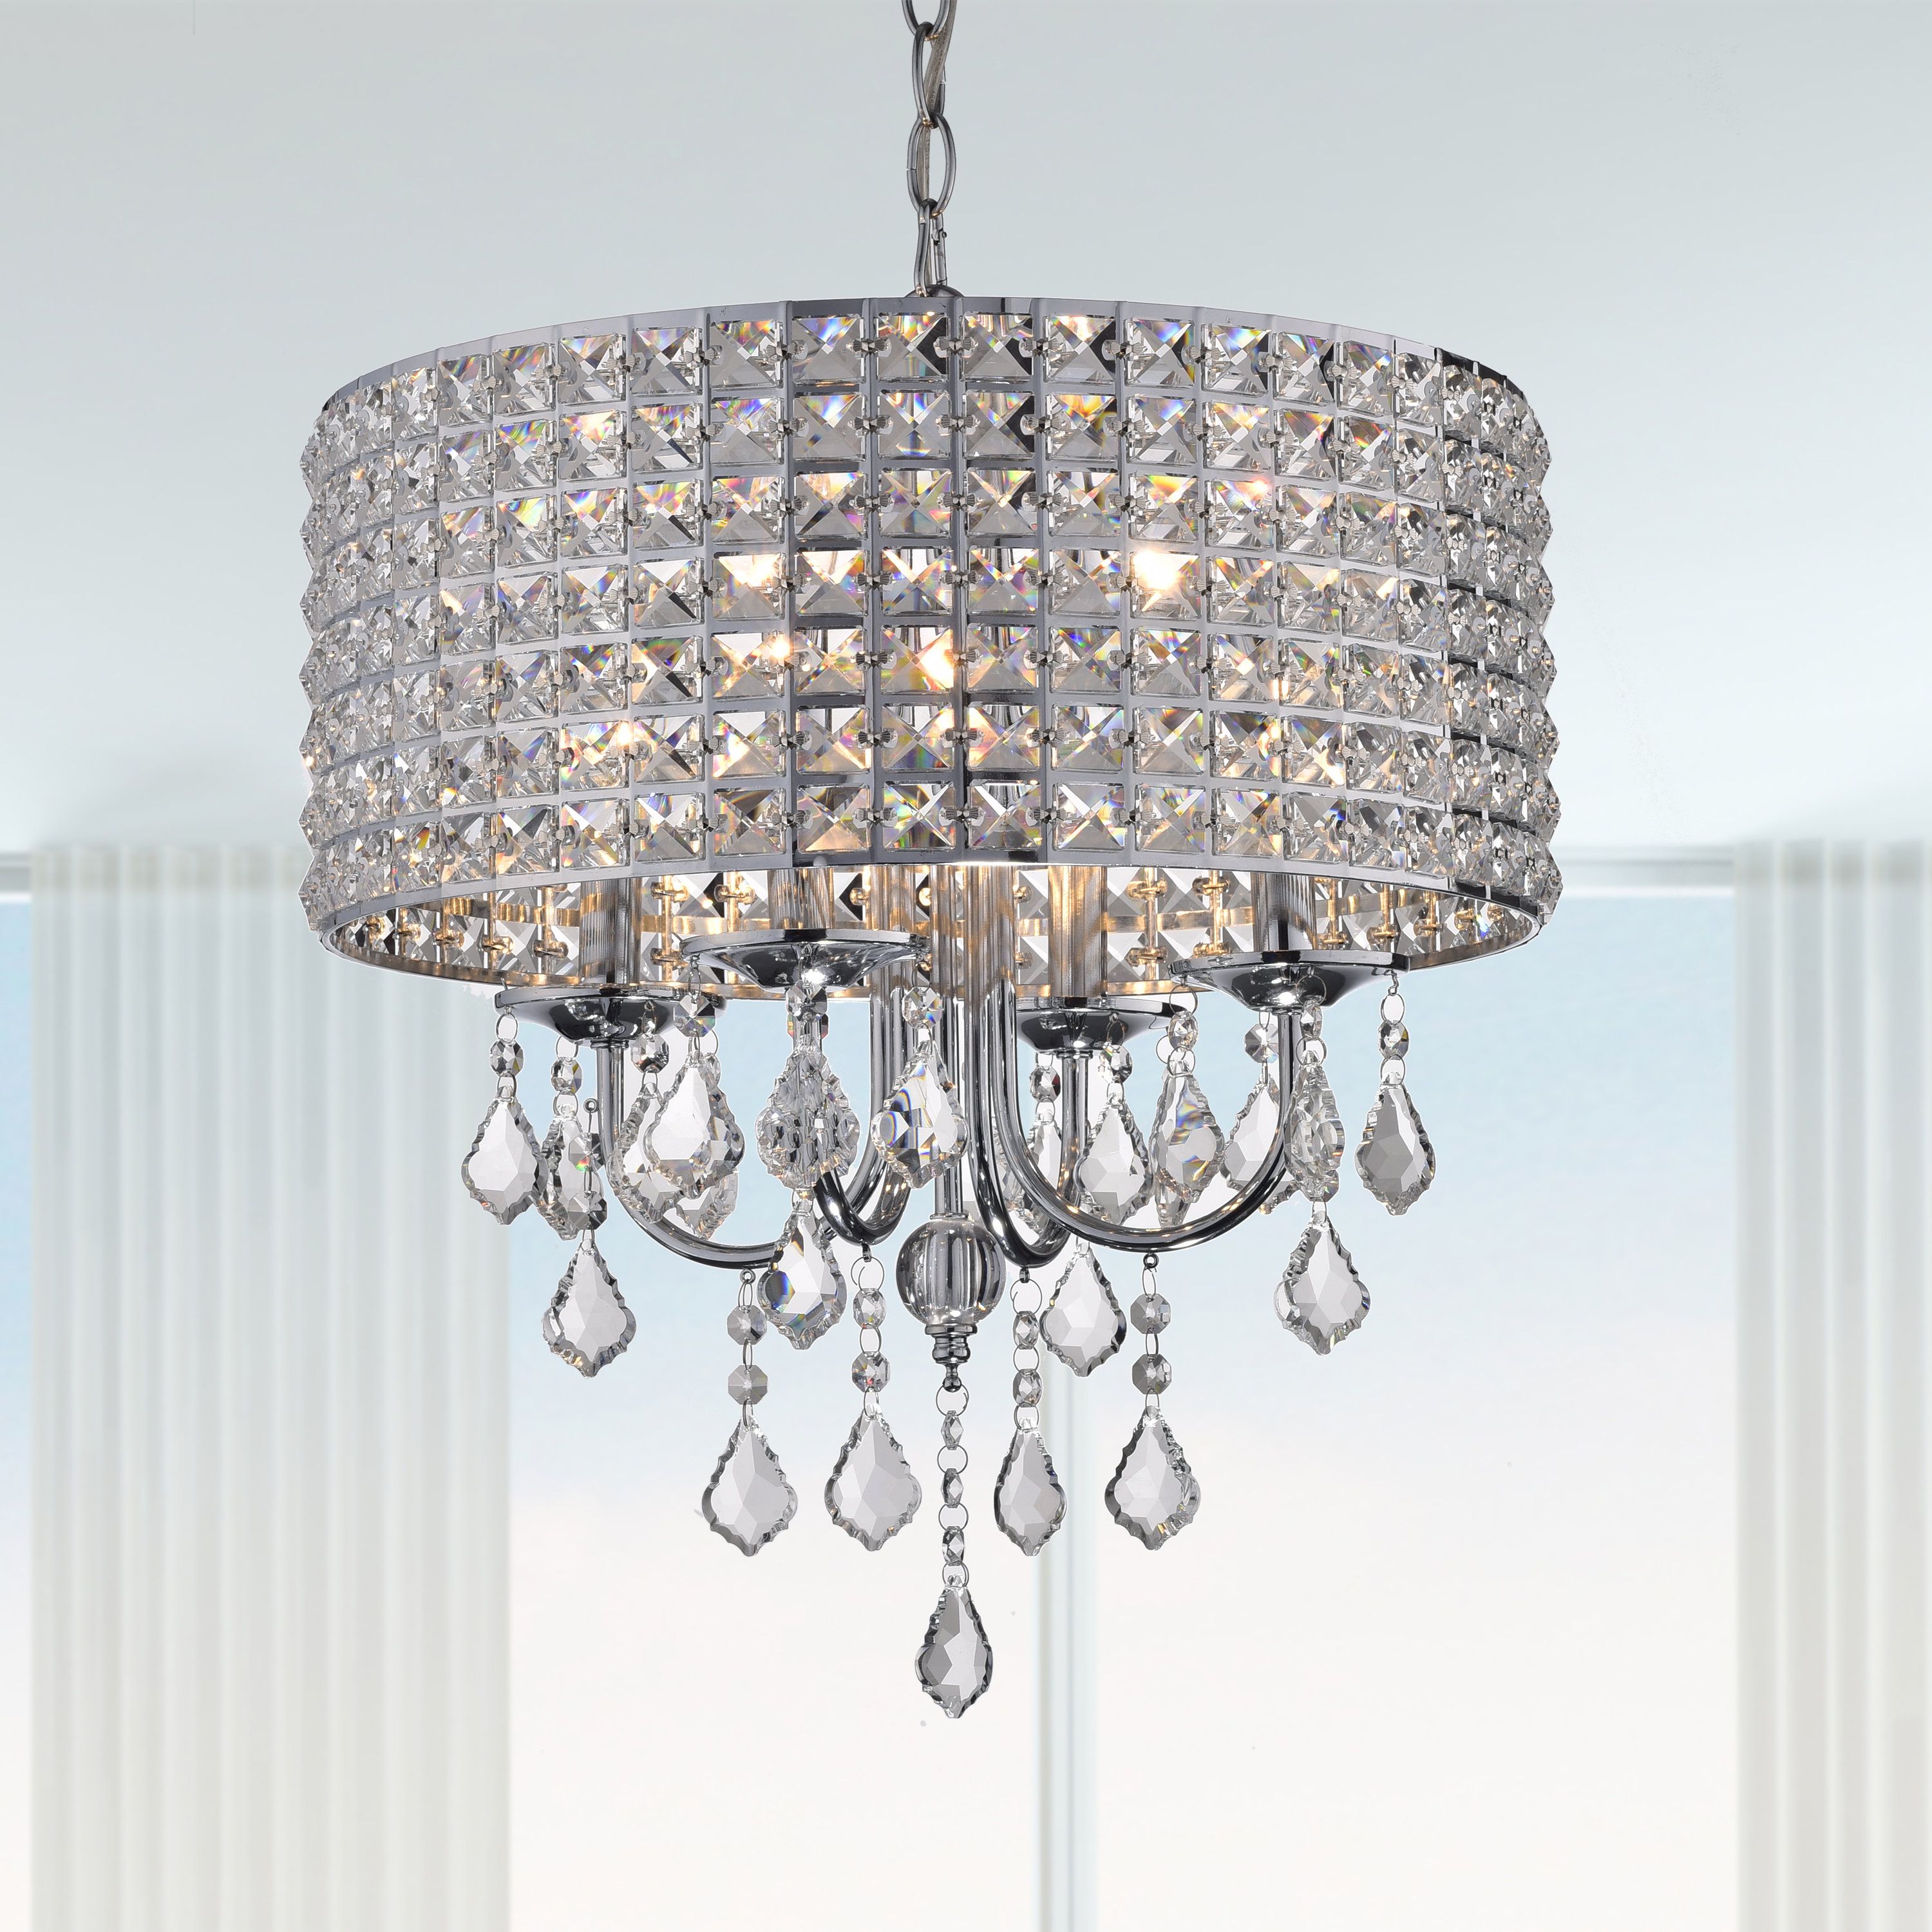 Benedetto 5 Light Crystal Chandeliers With Widely Used Albano 4 Light Crystal Chandelier (View 10 of 25)